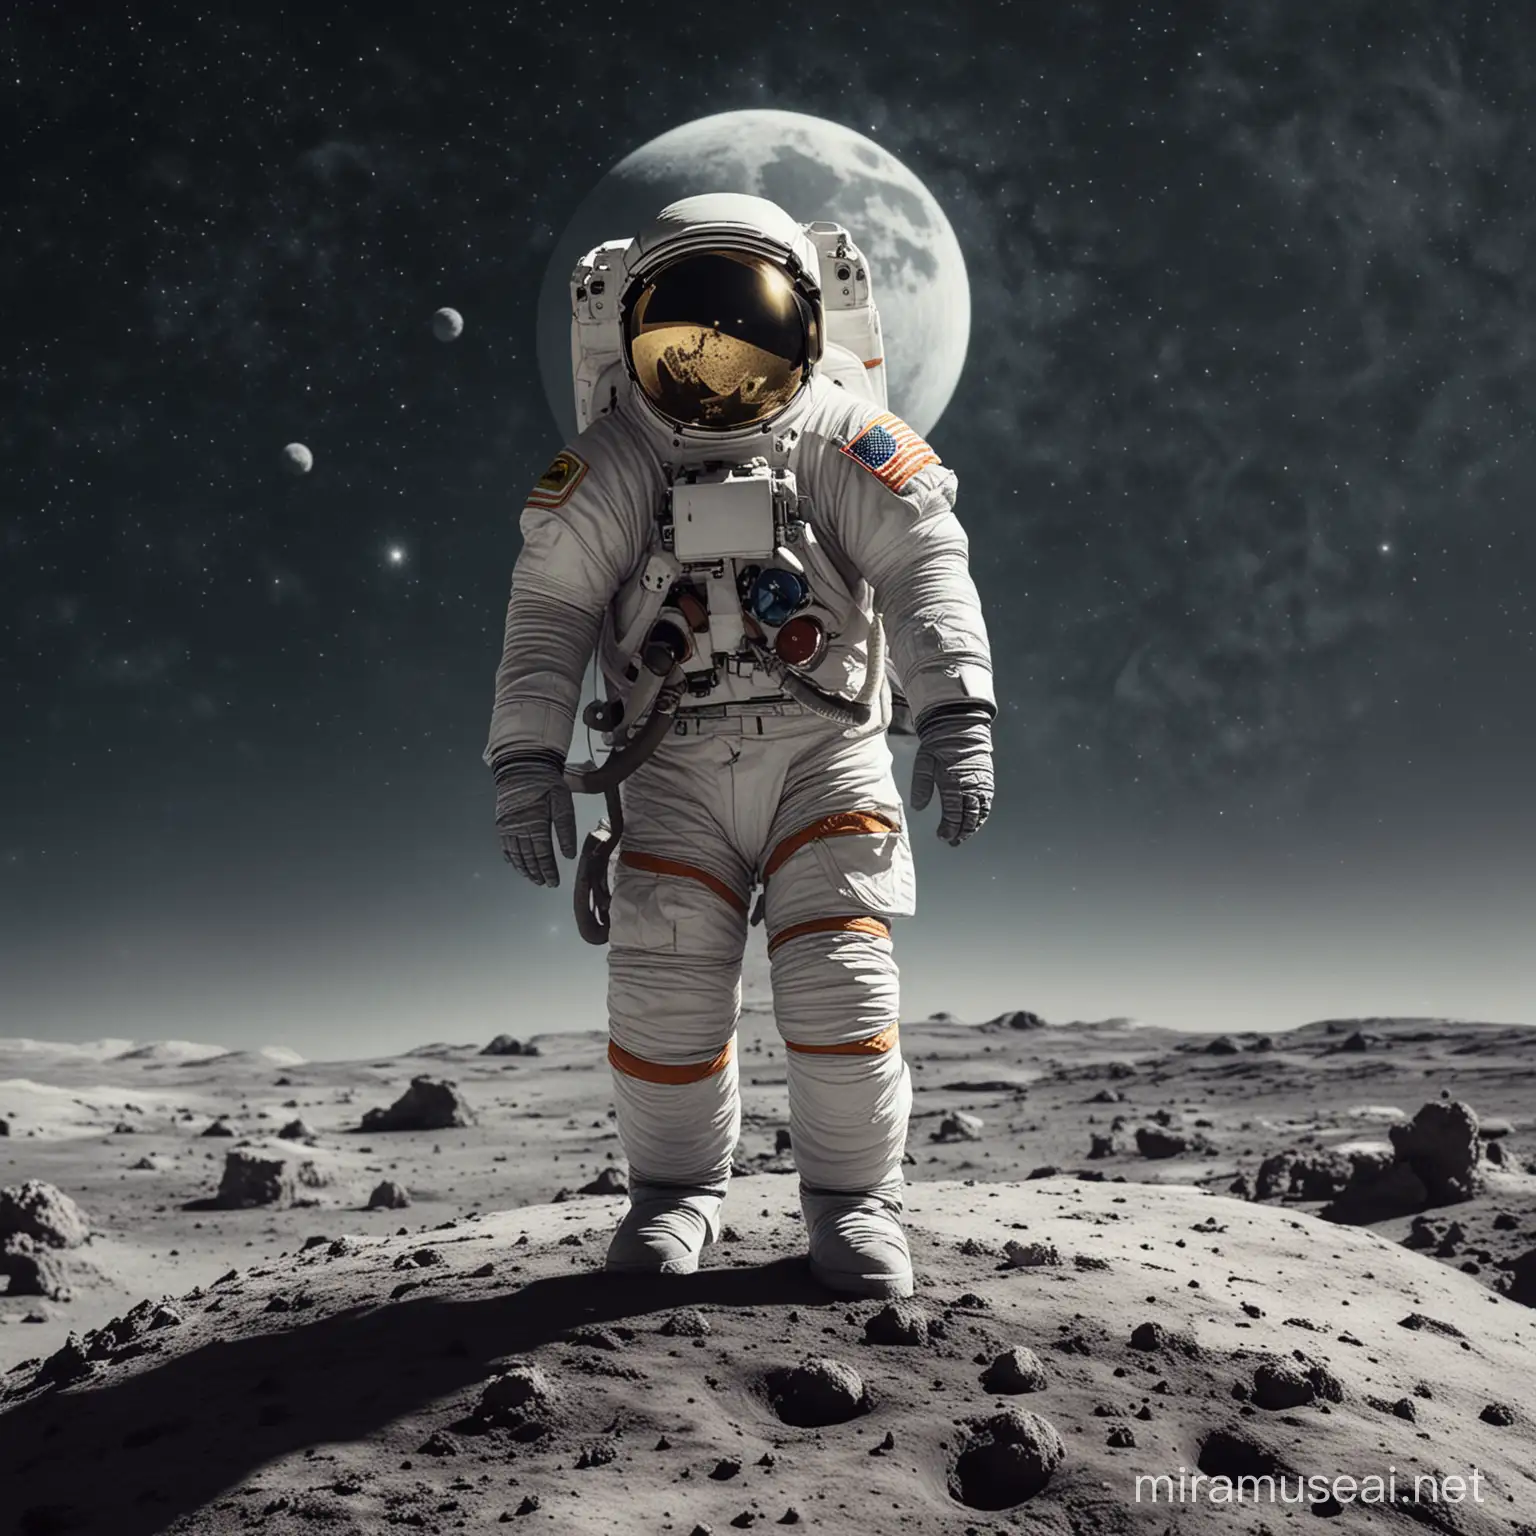 Lone Astronaut Exploring a Small Moon in Vast Space